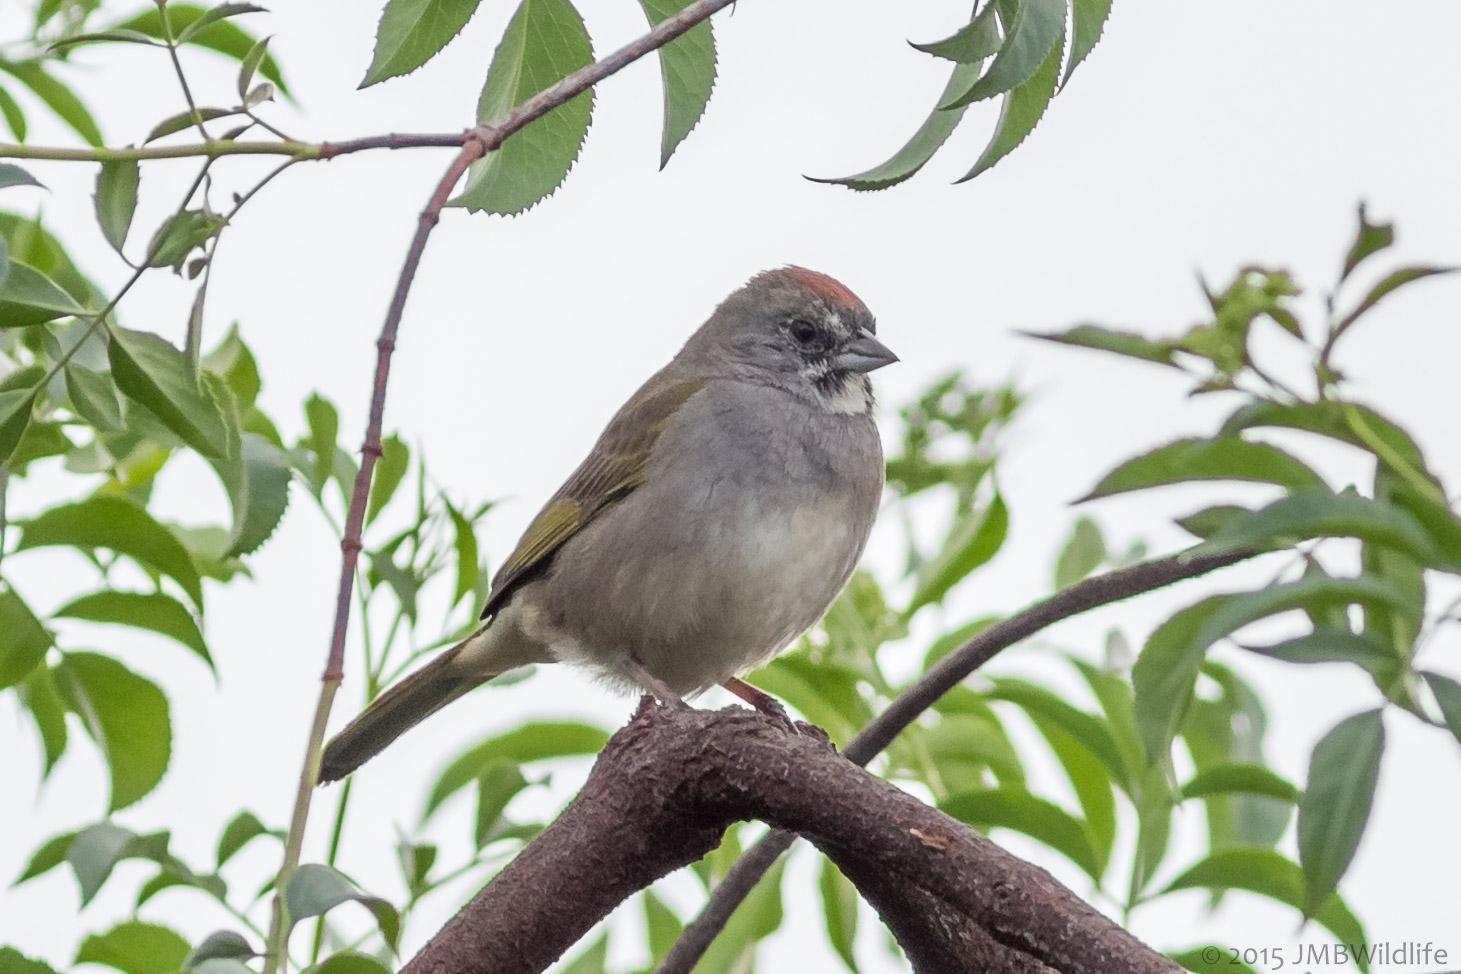 Green-tailed Towhee Photo by Jeff Bray